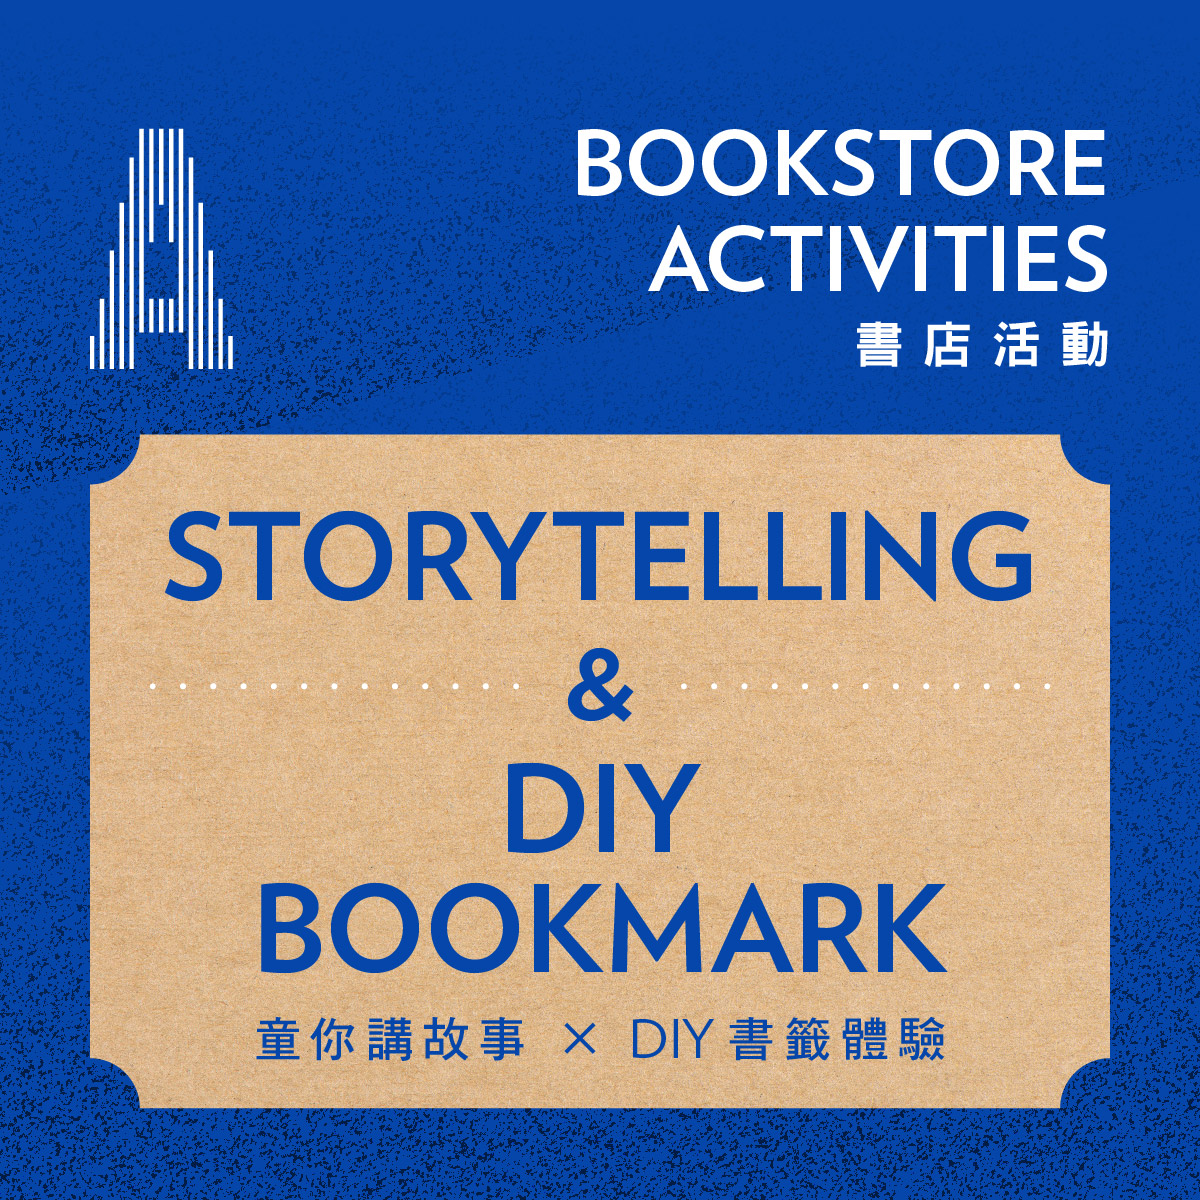 A Bookstore : Storytelling and DIY bookmark experience